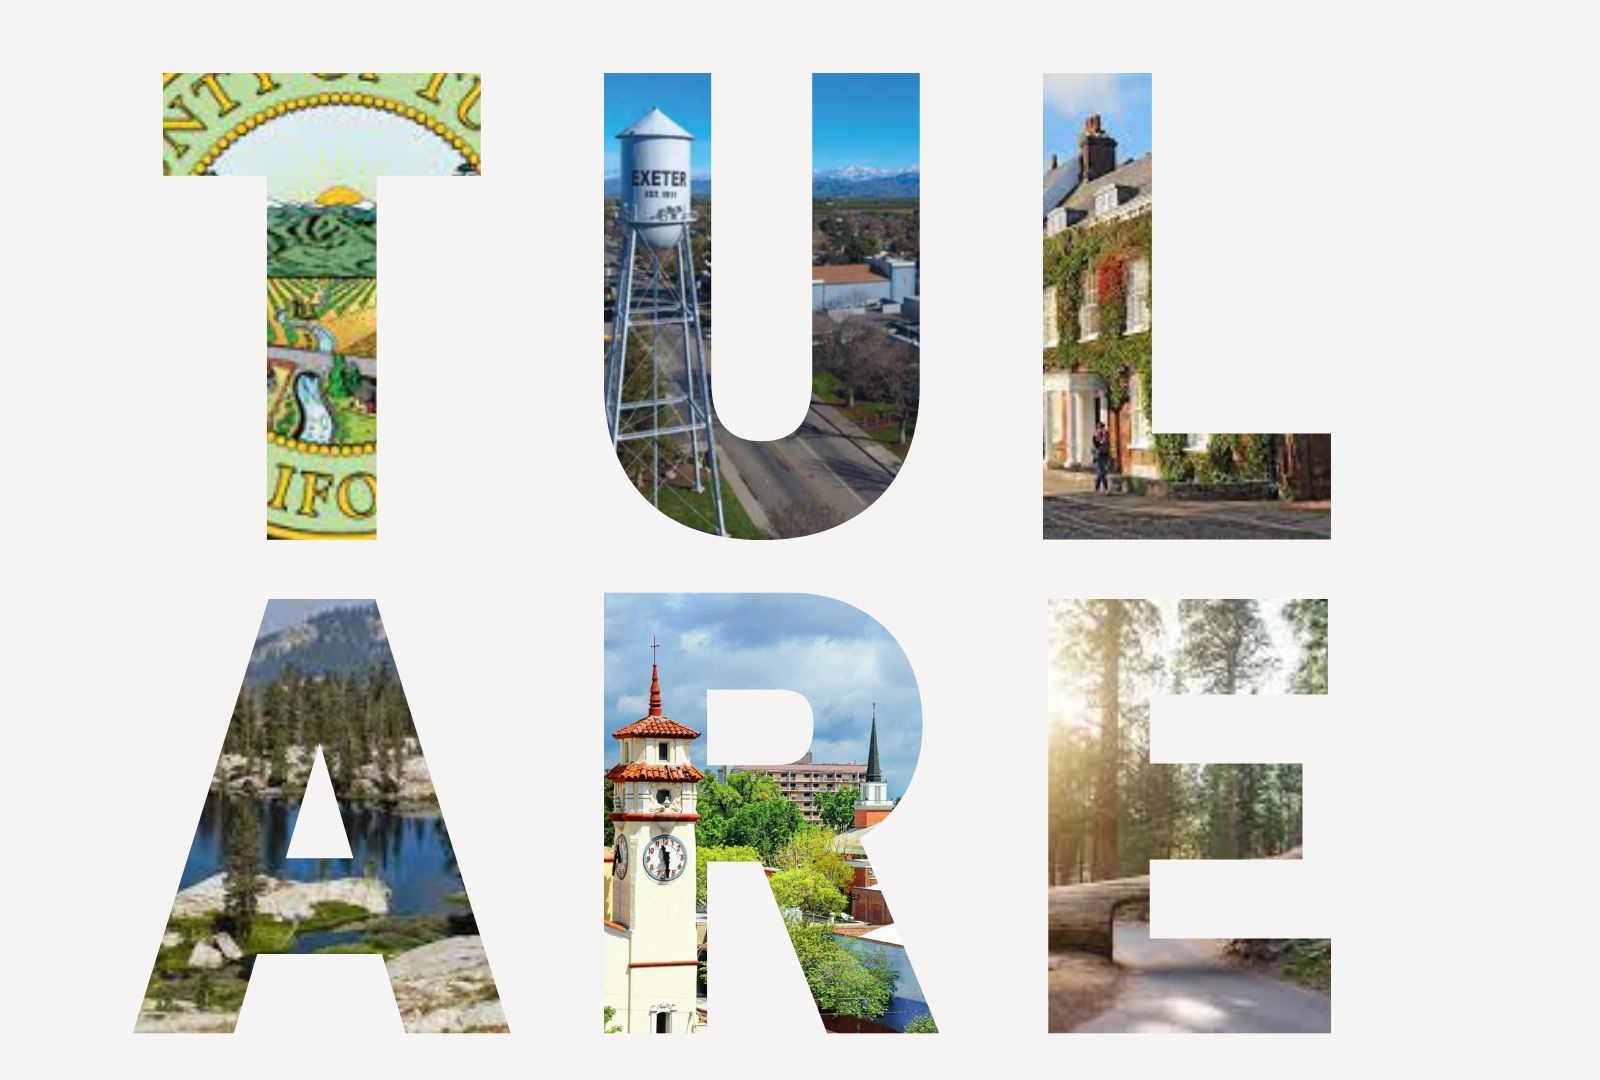 collage of 6 photographs arranged to form the phrase “TULARE"